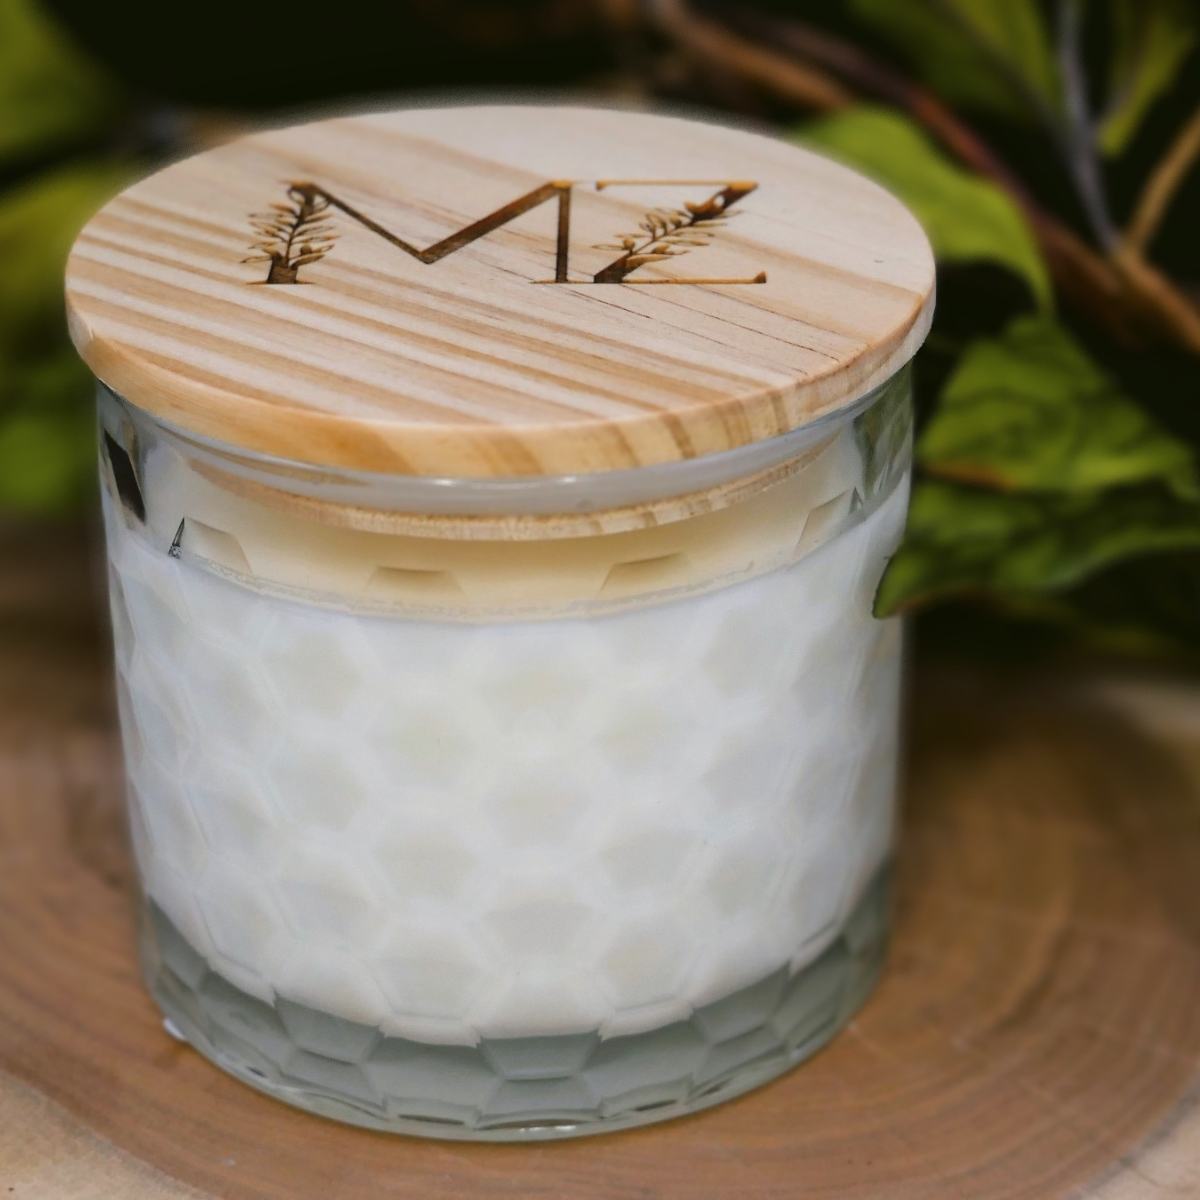 Cinnamon Spice Wood Wick Soy Candle - Holiday Collection